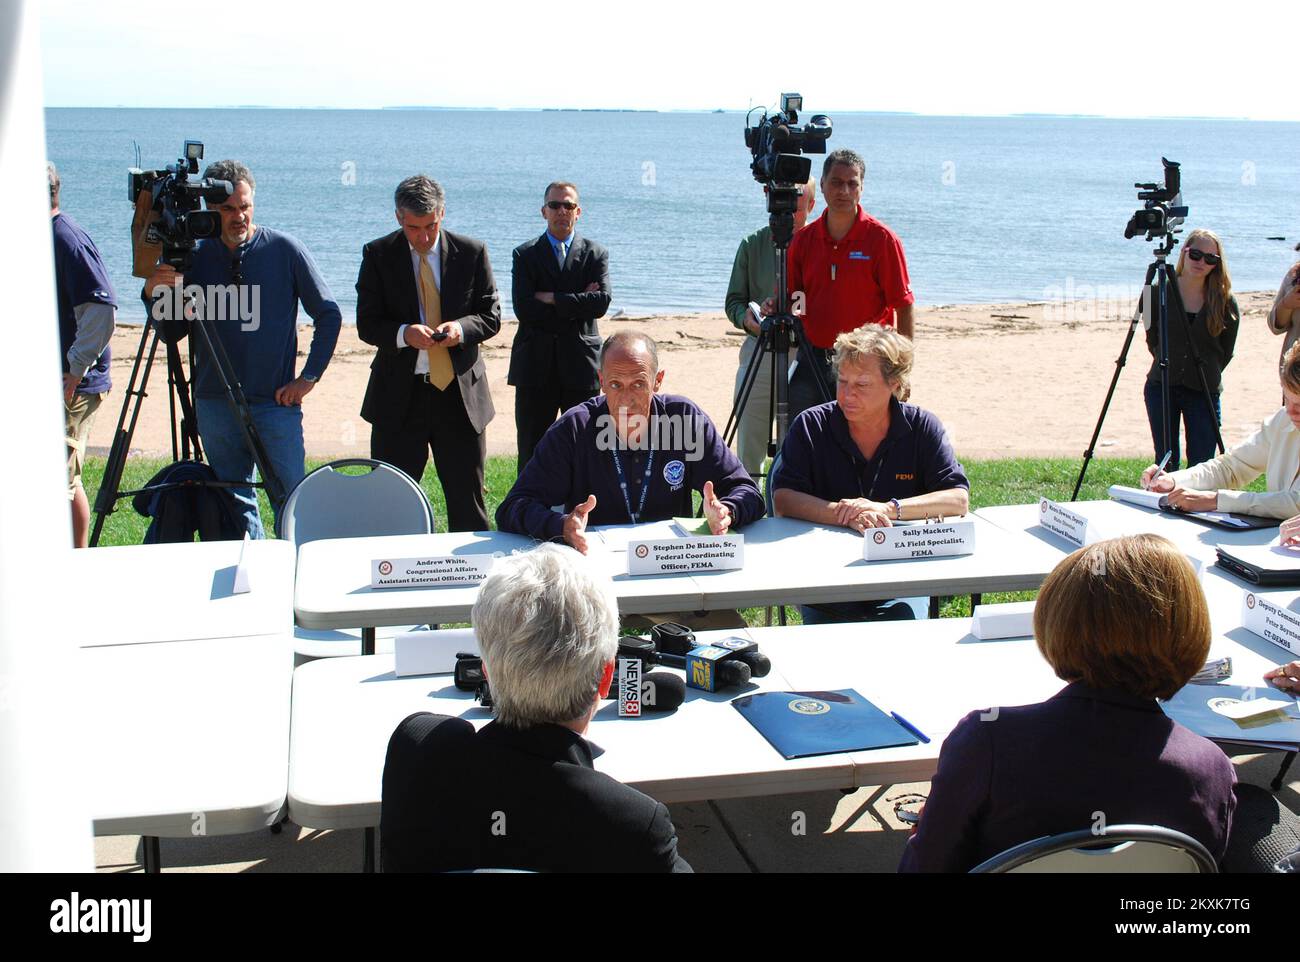 Coastal Storm   Flooding   Hurricane/Tropical Storm   Severe Storm - East Haven, Conn. , September 16, 2011   Stephen De Blasio, FCO for recovery in Connecticut from effects of Tropical Storm Irene, explains in detail FEMA's successes thus far. The meeting at the East Haven DRC with State and local officials preceded House Minority Leader Nancy Pelosi's tour of damage and destruction along the East Haven shore, and meetings with residents. North Carolina Hurricane Irene. Photographs Relating to Disasters and Emergency Management Programs, Activities, and Officials Stock Photo